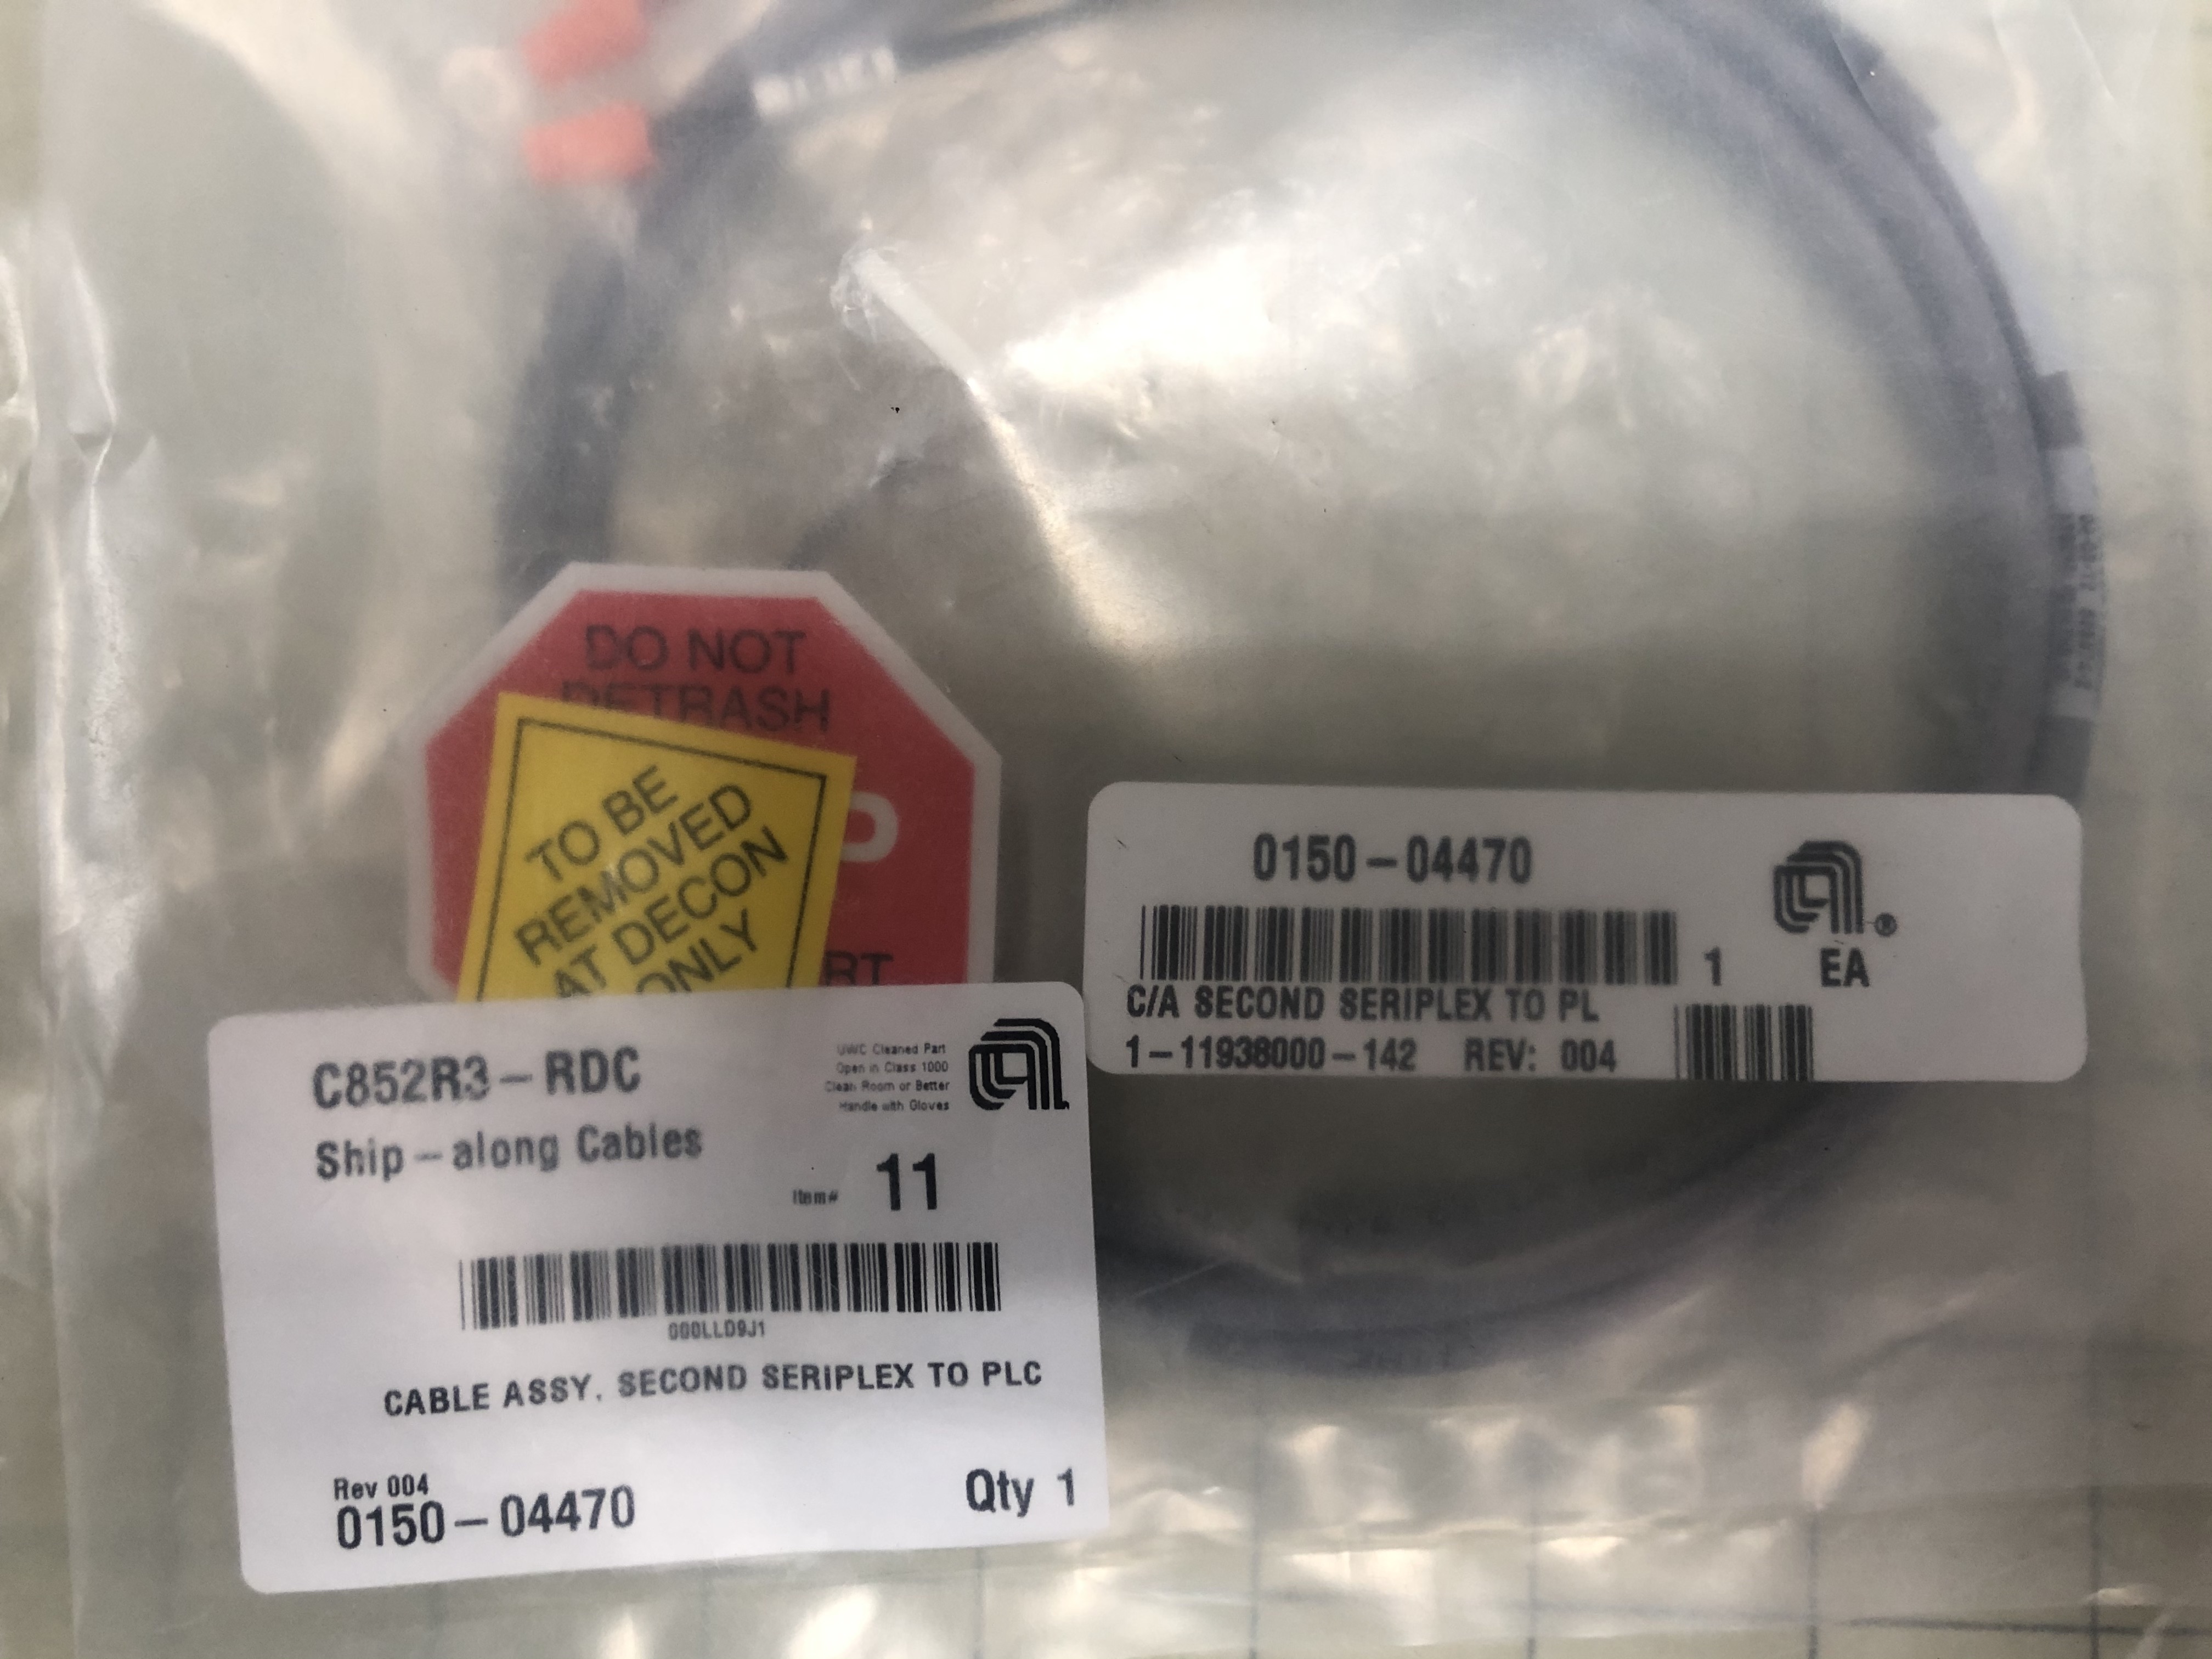 CABLE ASSY, SECOND SERIPLEX TO PLC